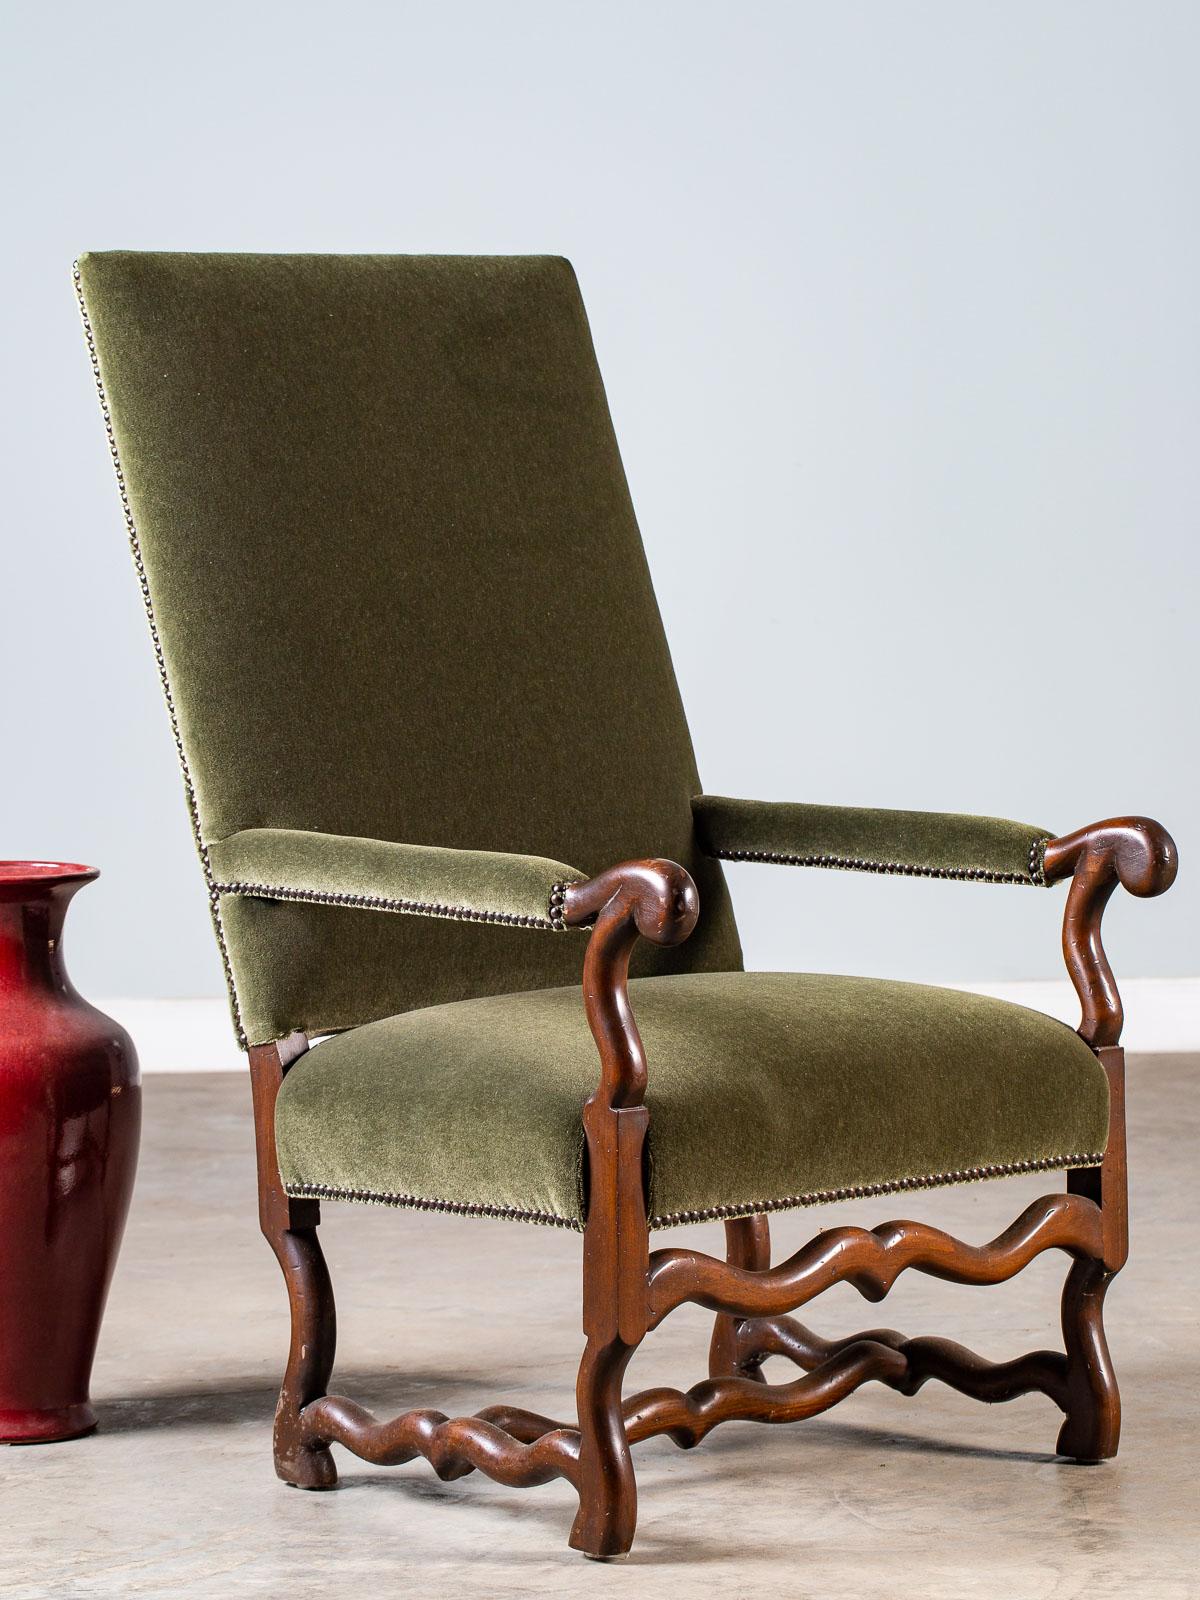 A modern French copy of a Louis XIII style mouton leg armchair with distinctive features covered in a green mohair fabric. What sets this chair apart is the slant of the back and the fully upholstered arms which gives this chair its amazingly